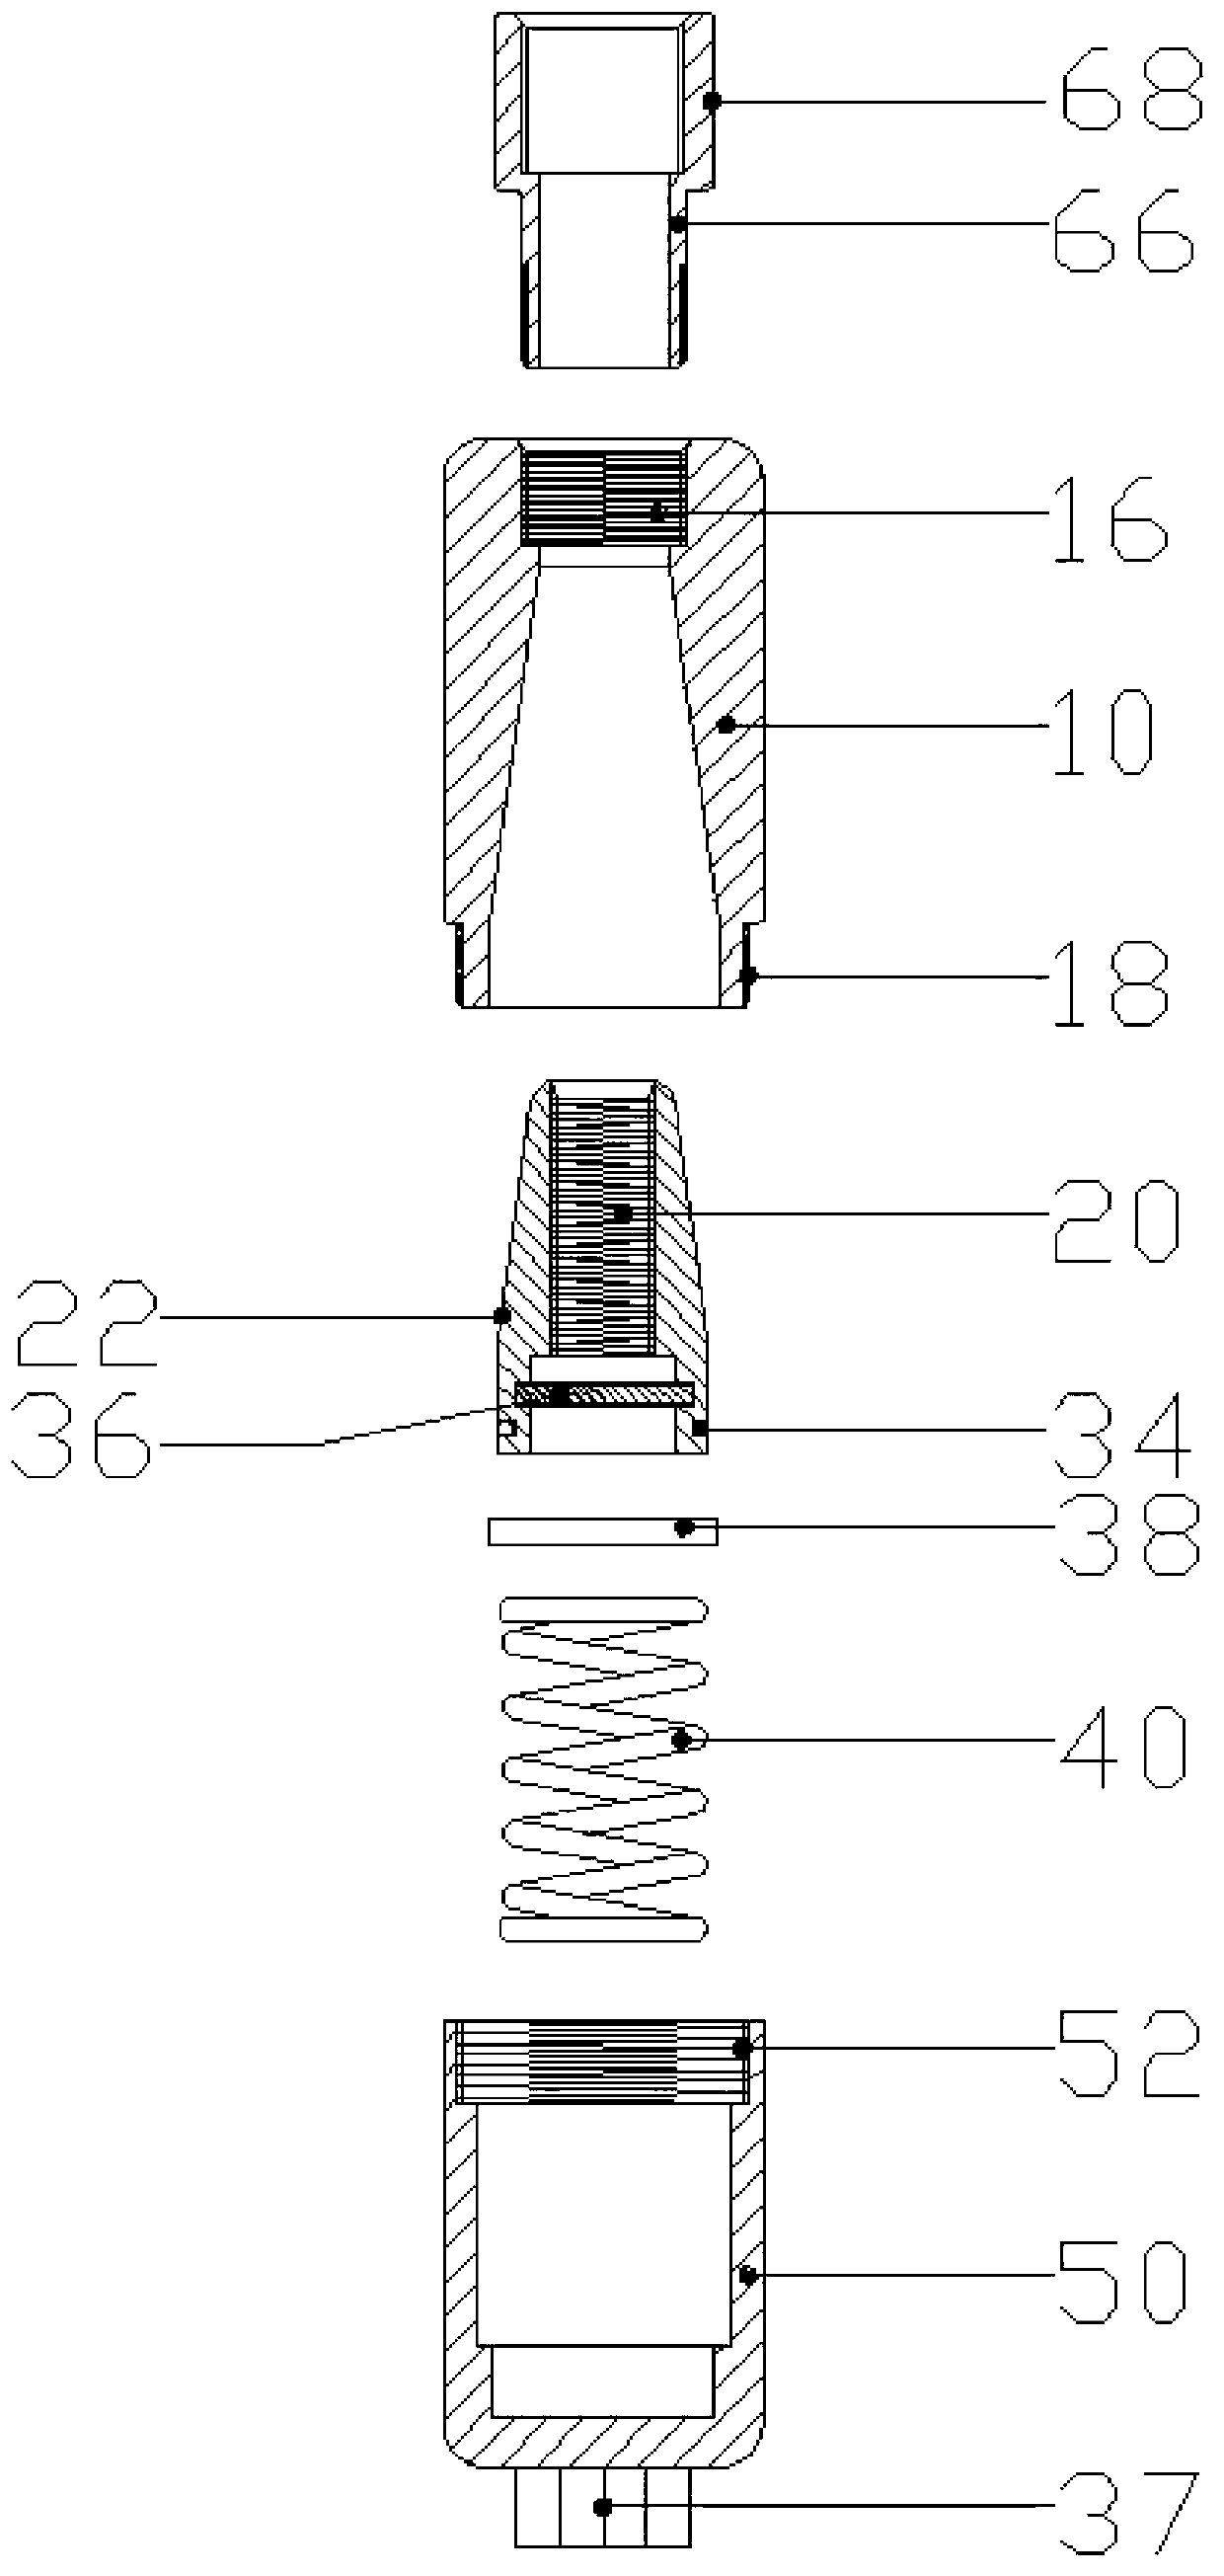 Removing type anchorage device